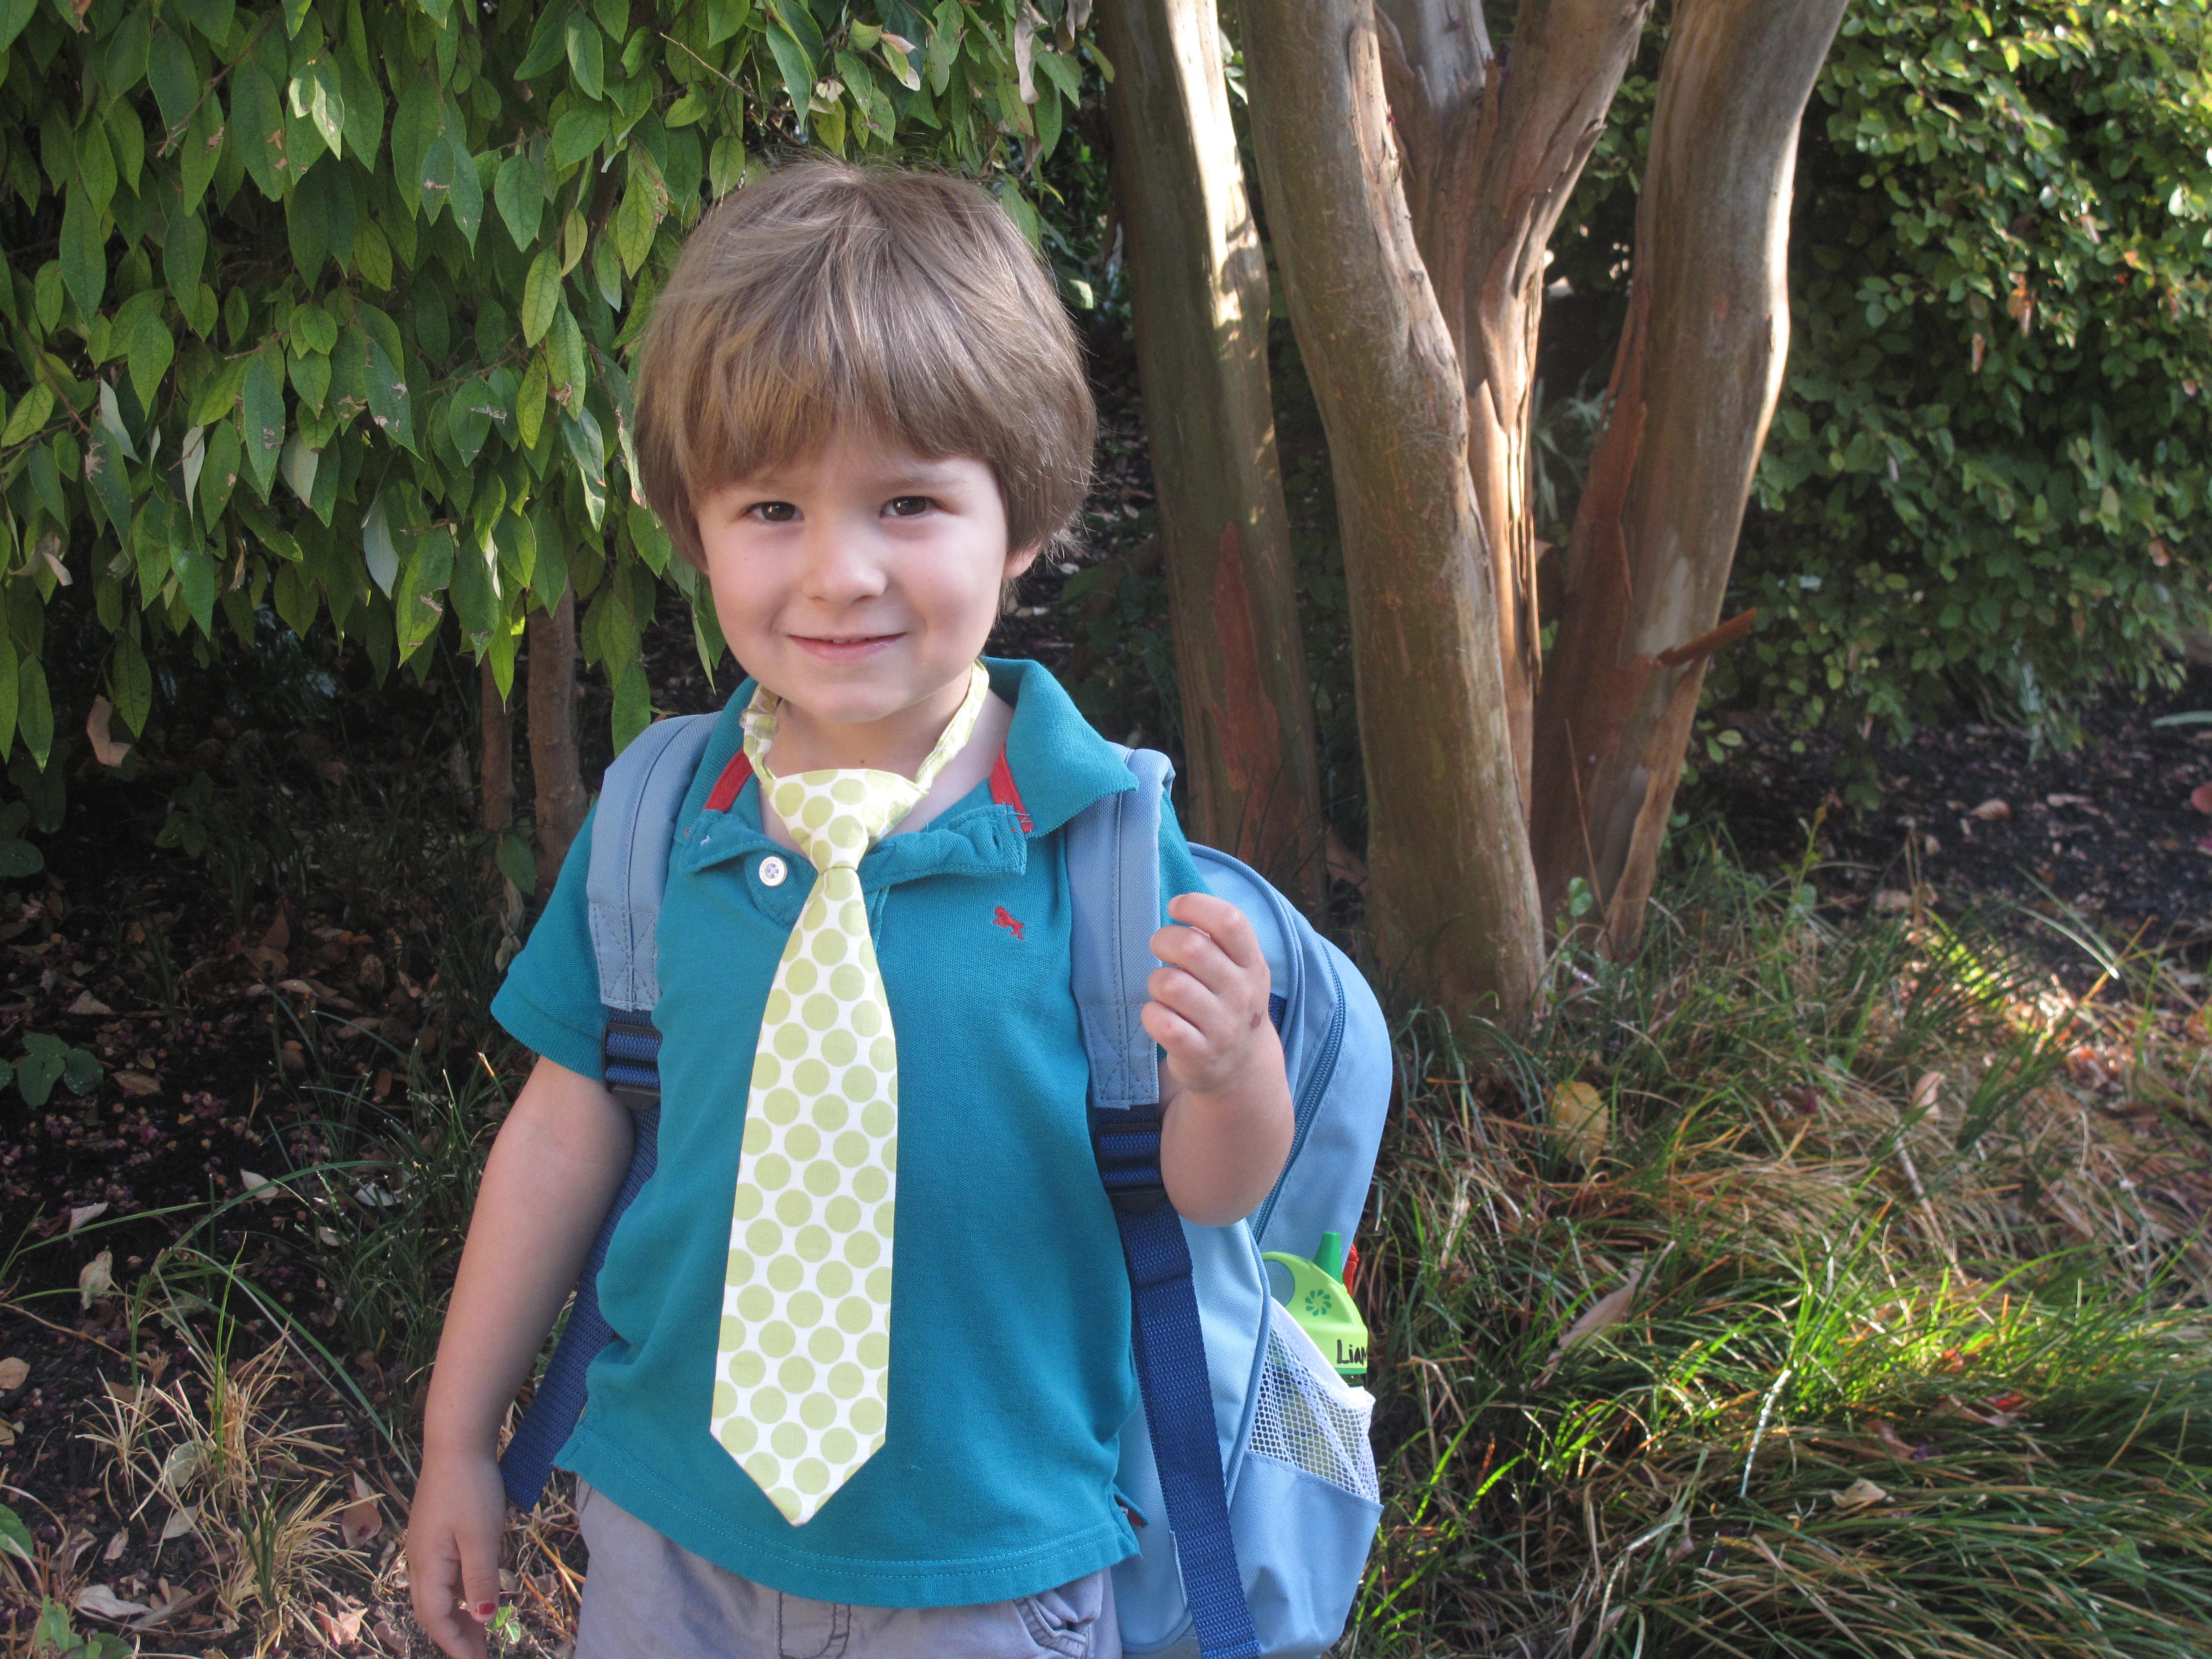 A boy with a backpack and a tie.